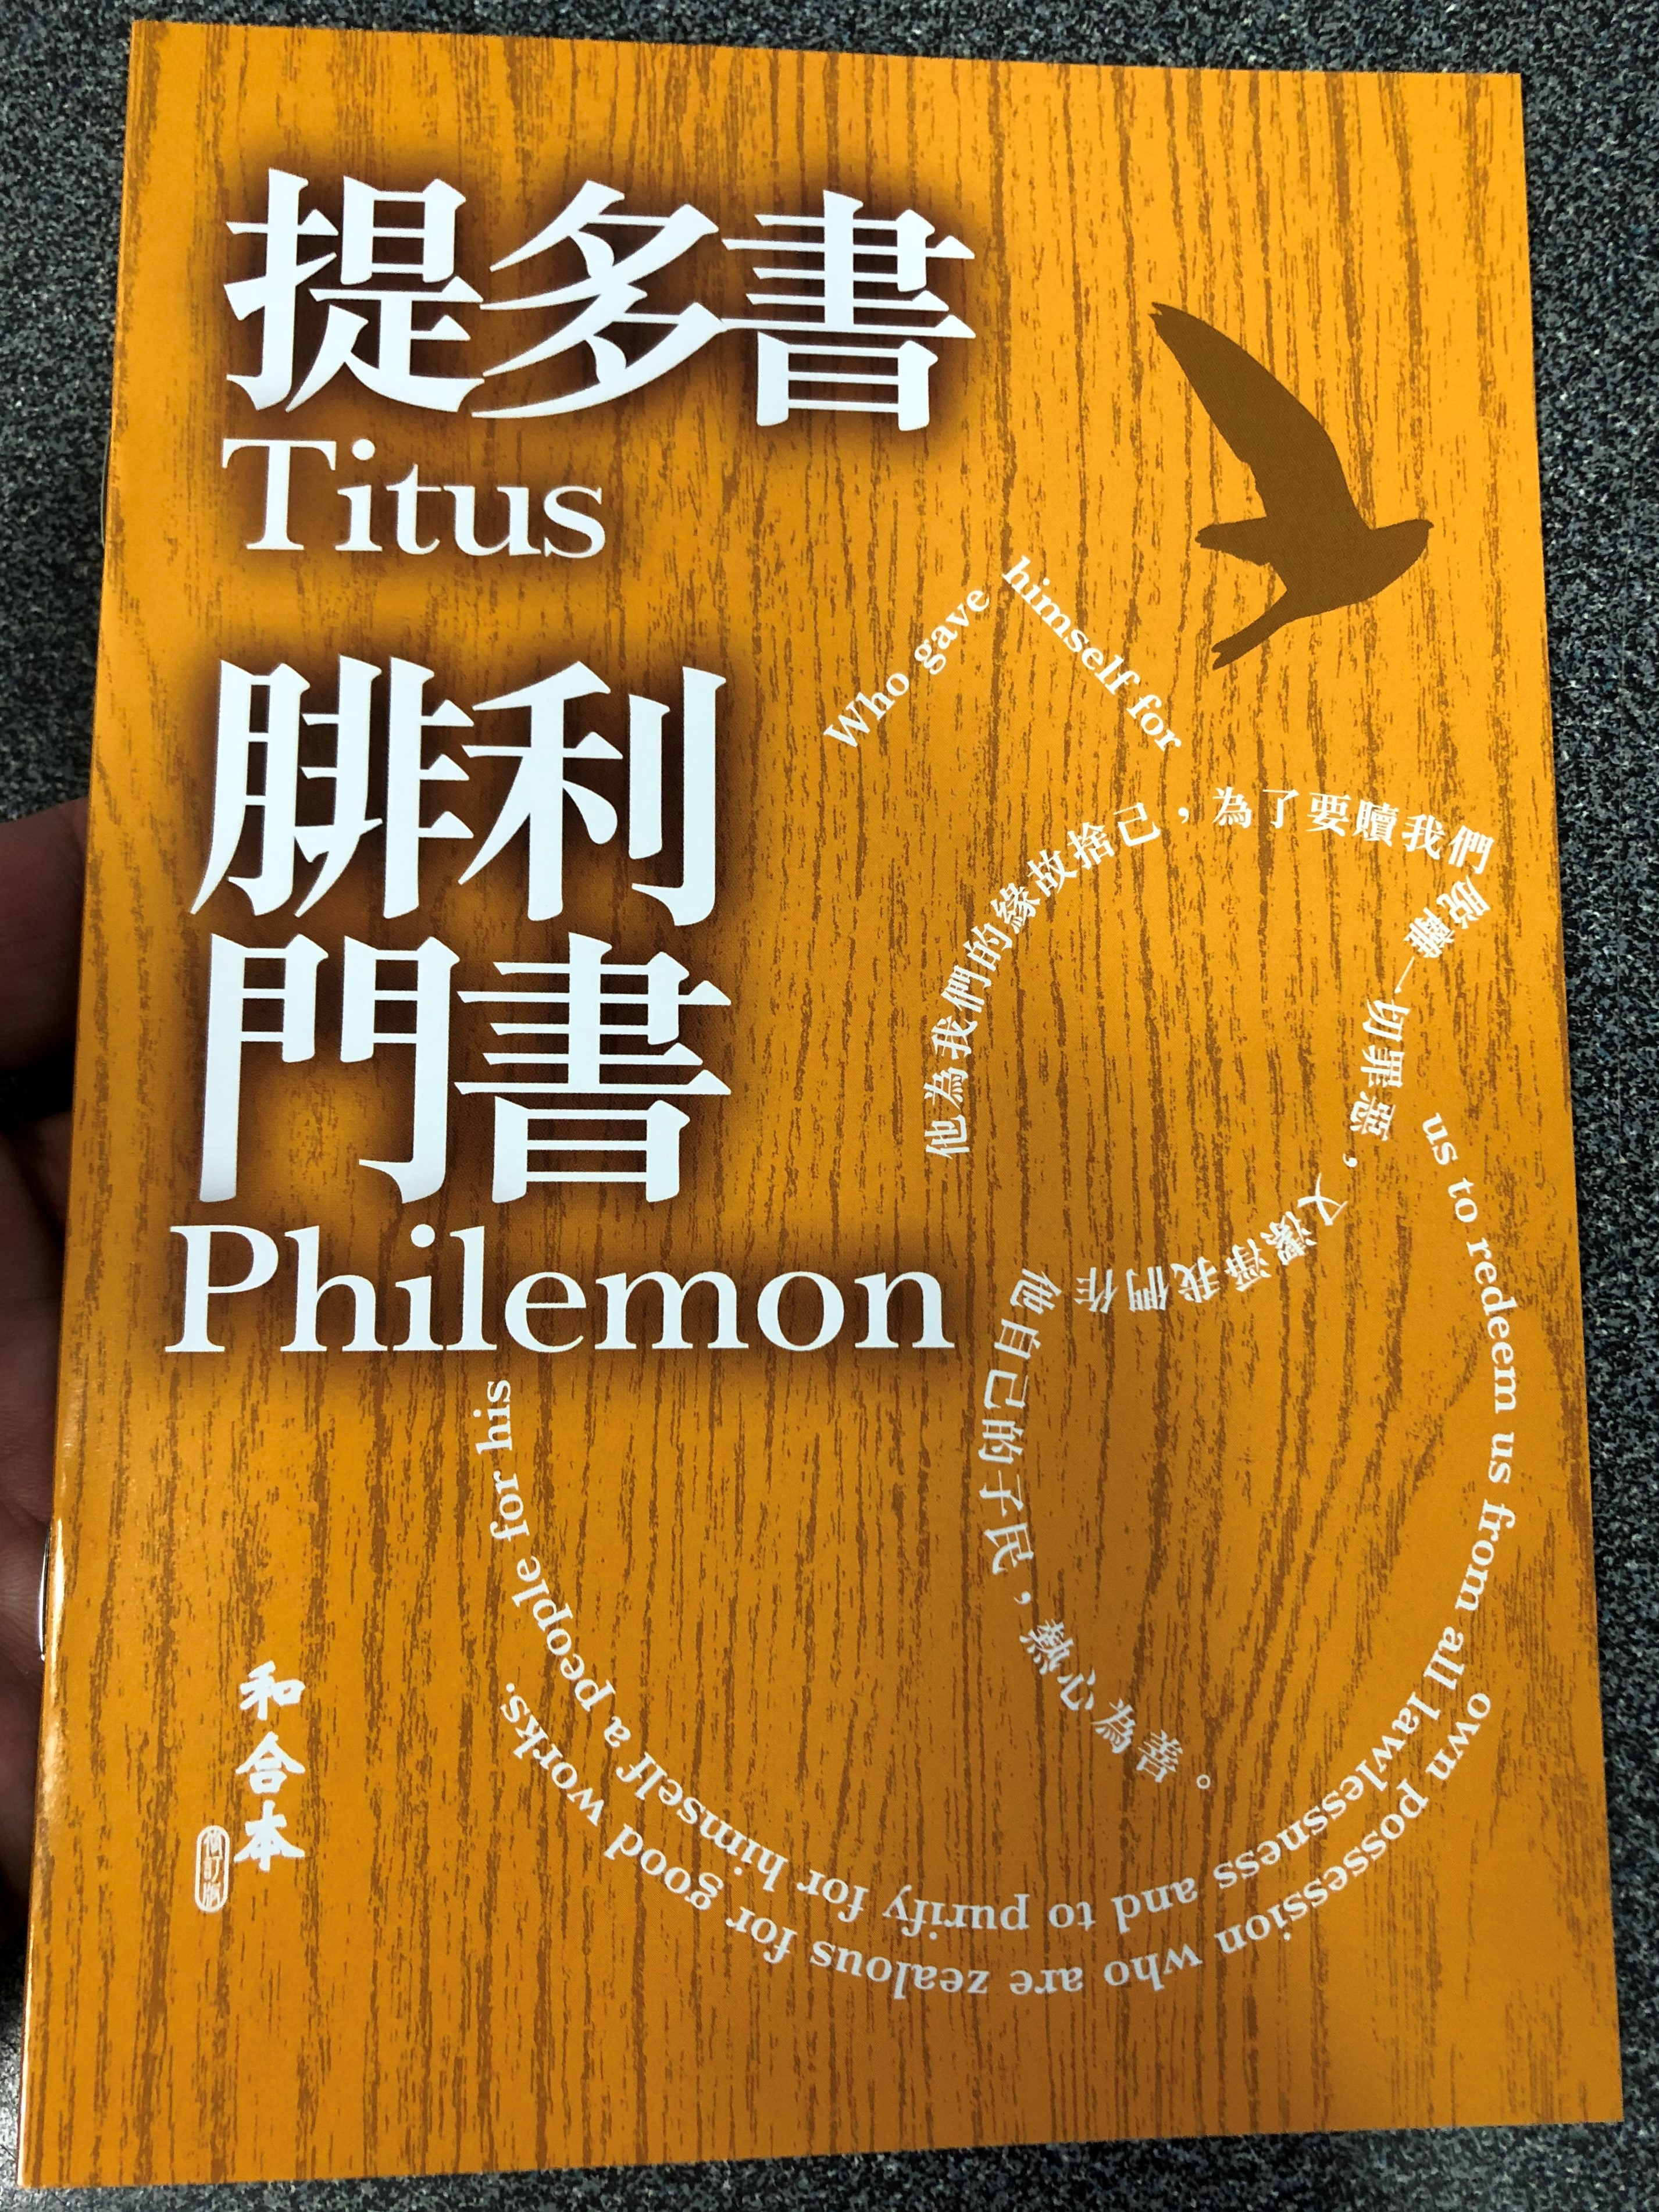 paul-s-letter-to-titus-and-philemon-in-chinese-language-super-large-print-edition-revised-chinese-union-version-cu2010-hkbs-1-.jpg